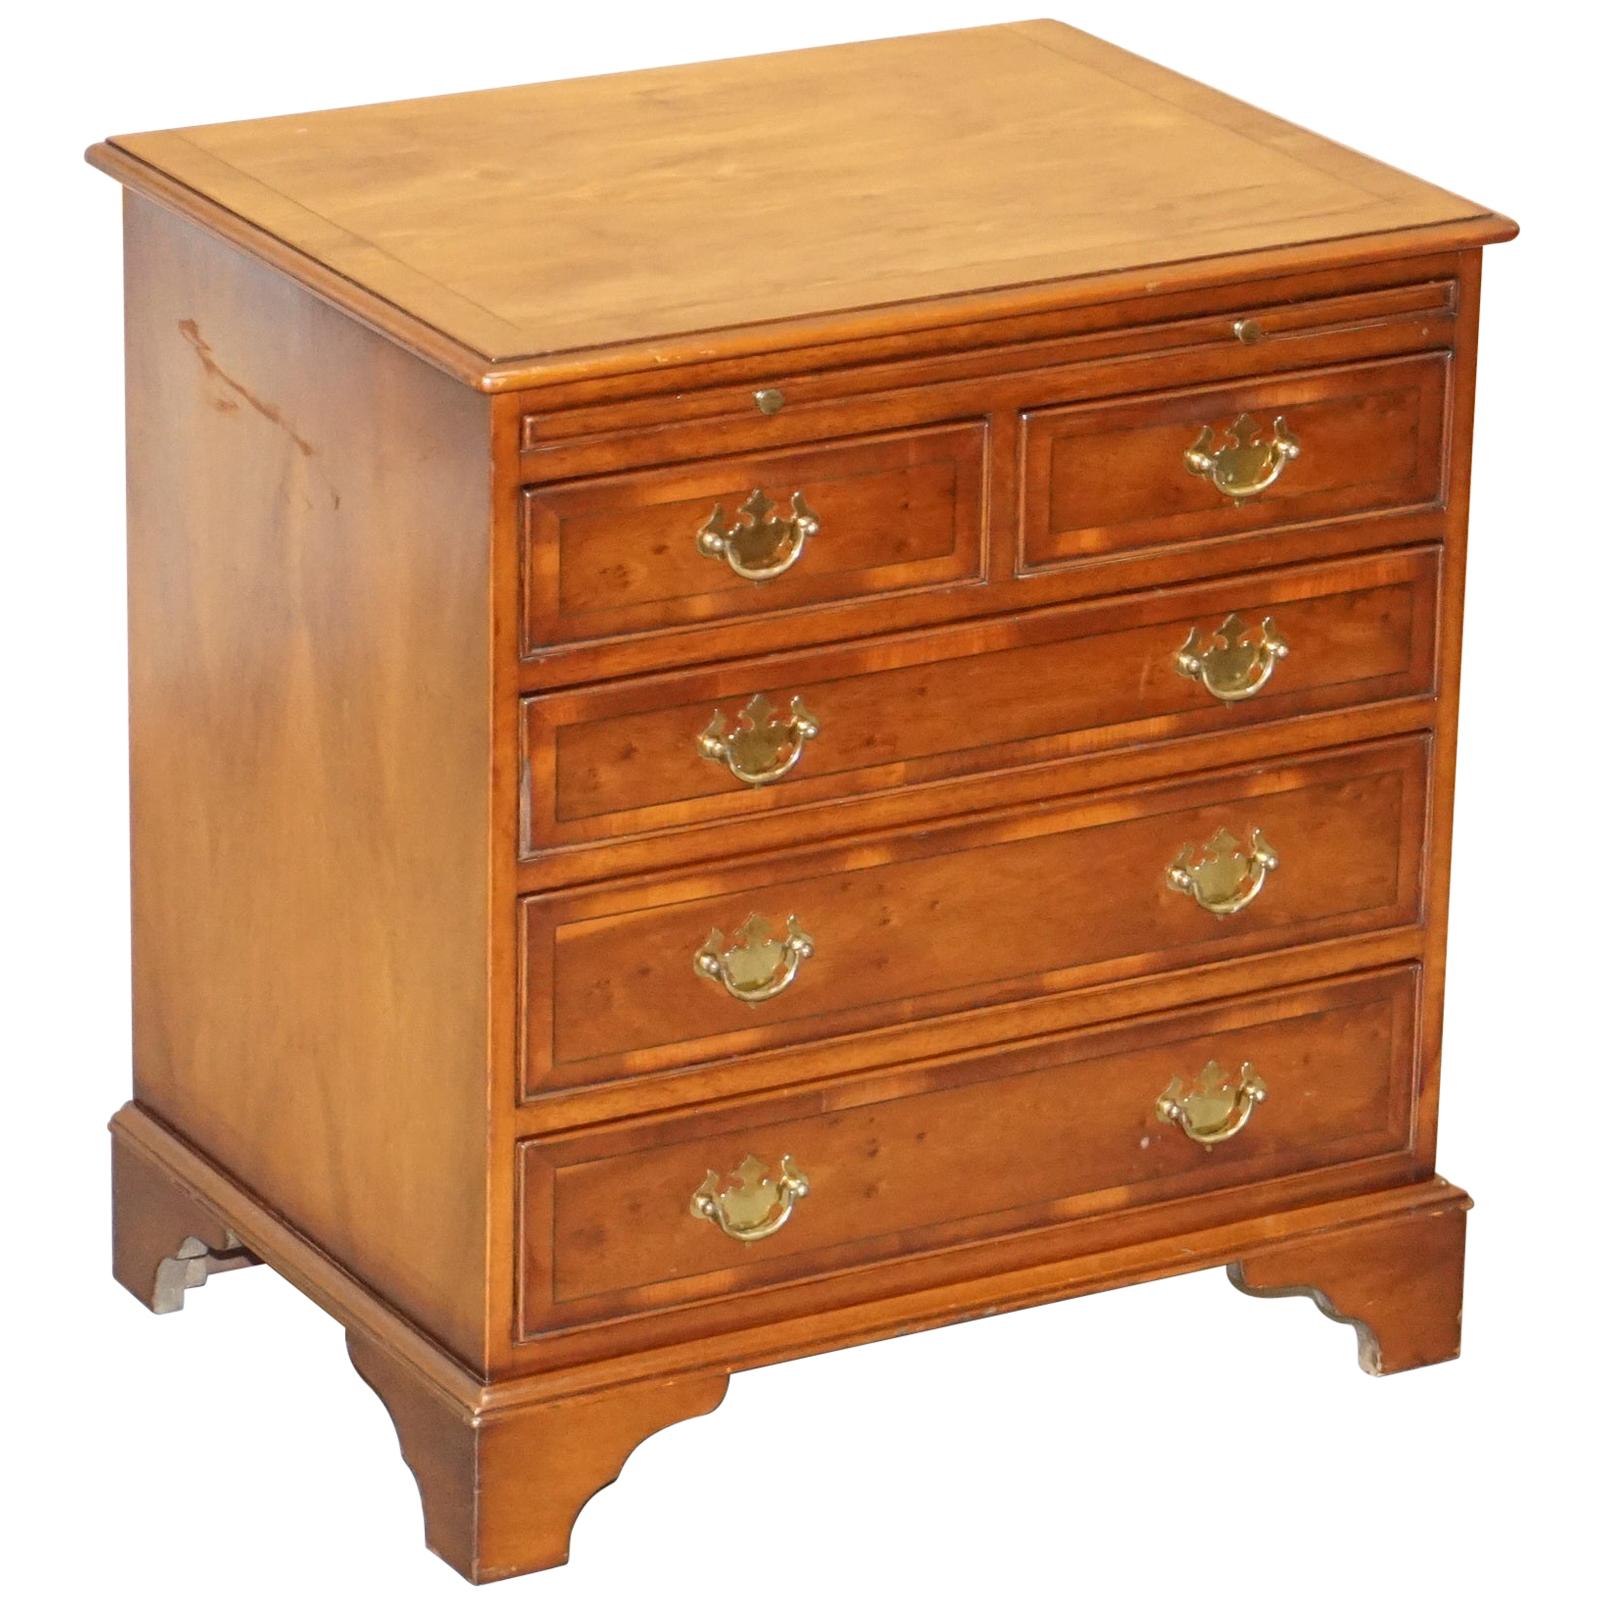 Burr Yew Wood Chest of Drawers Butlers Leather Serving Tray Large Side Table